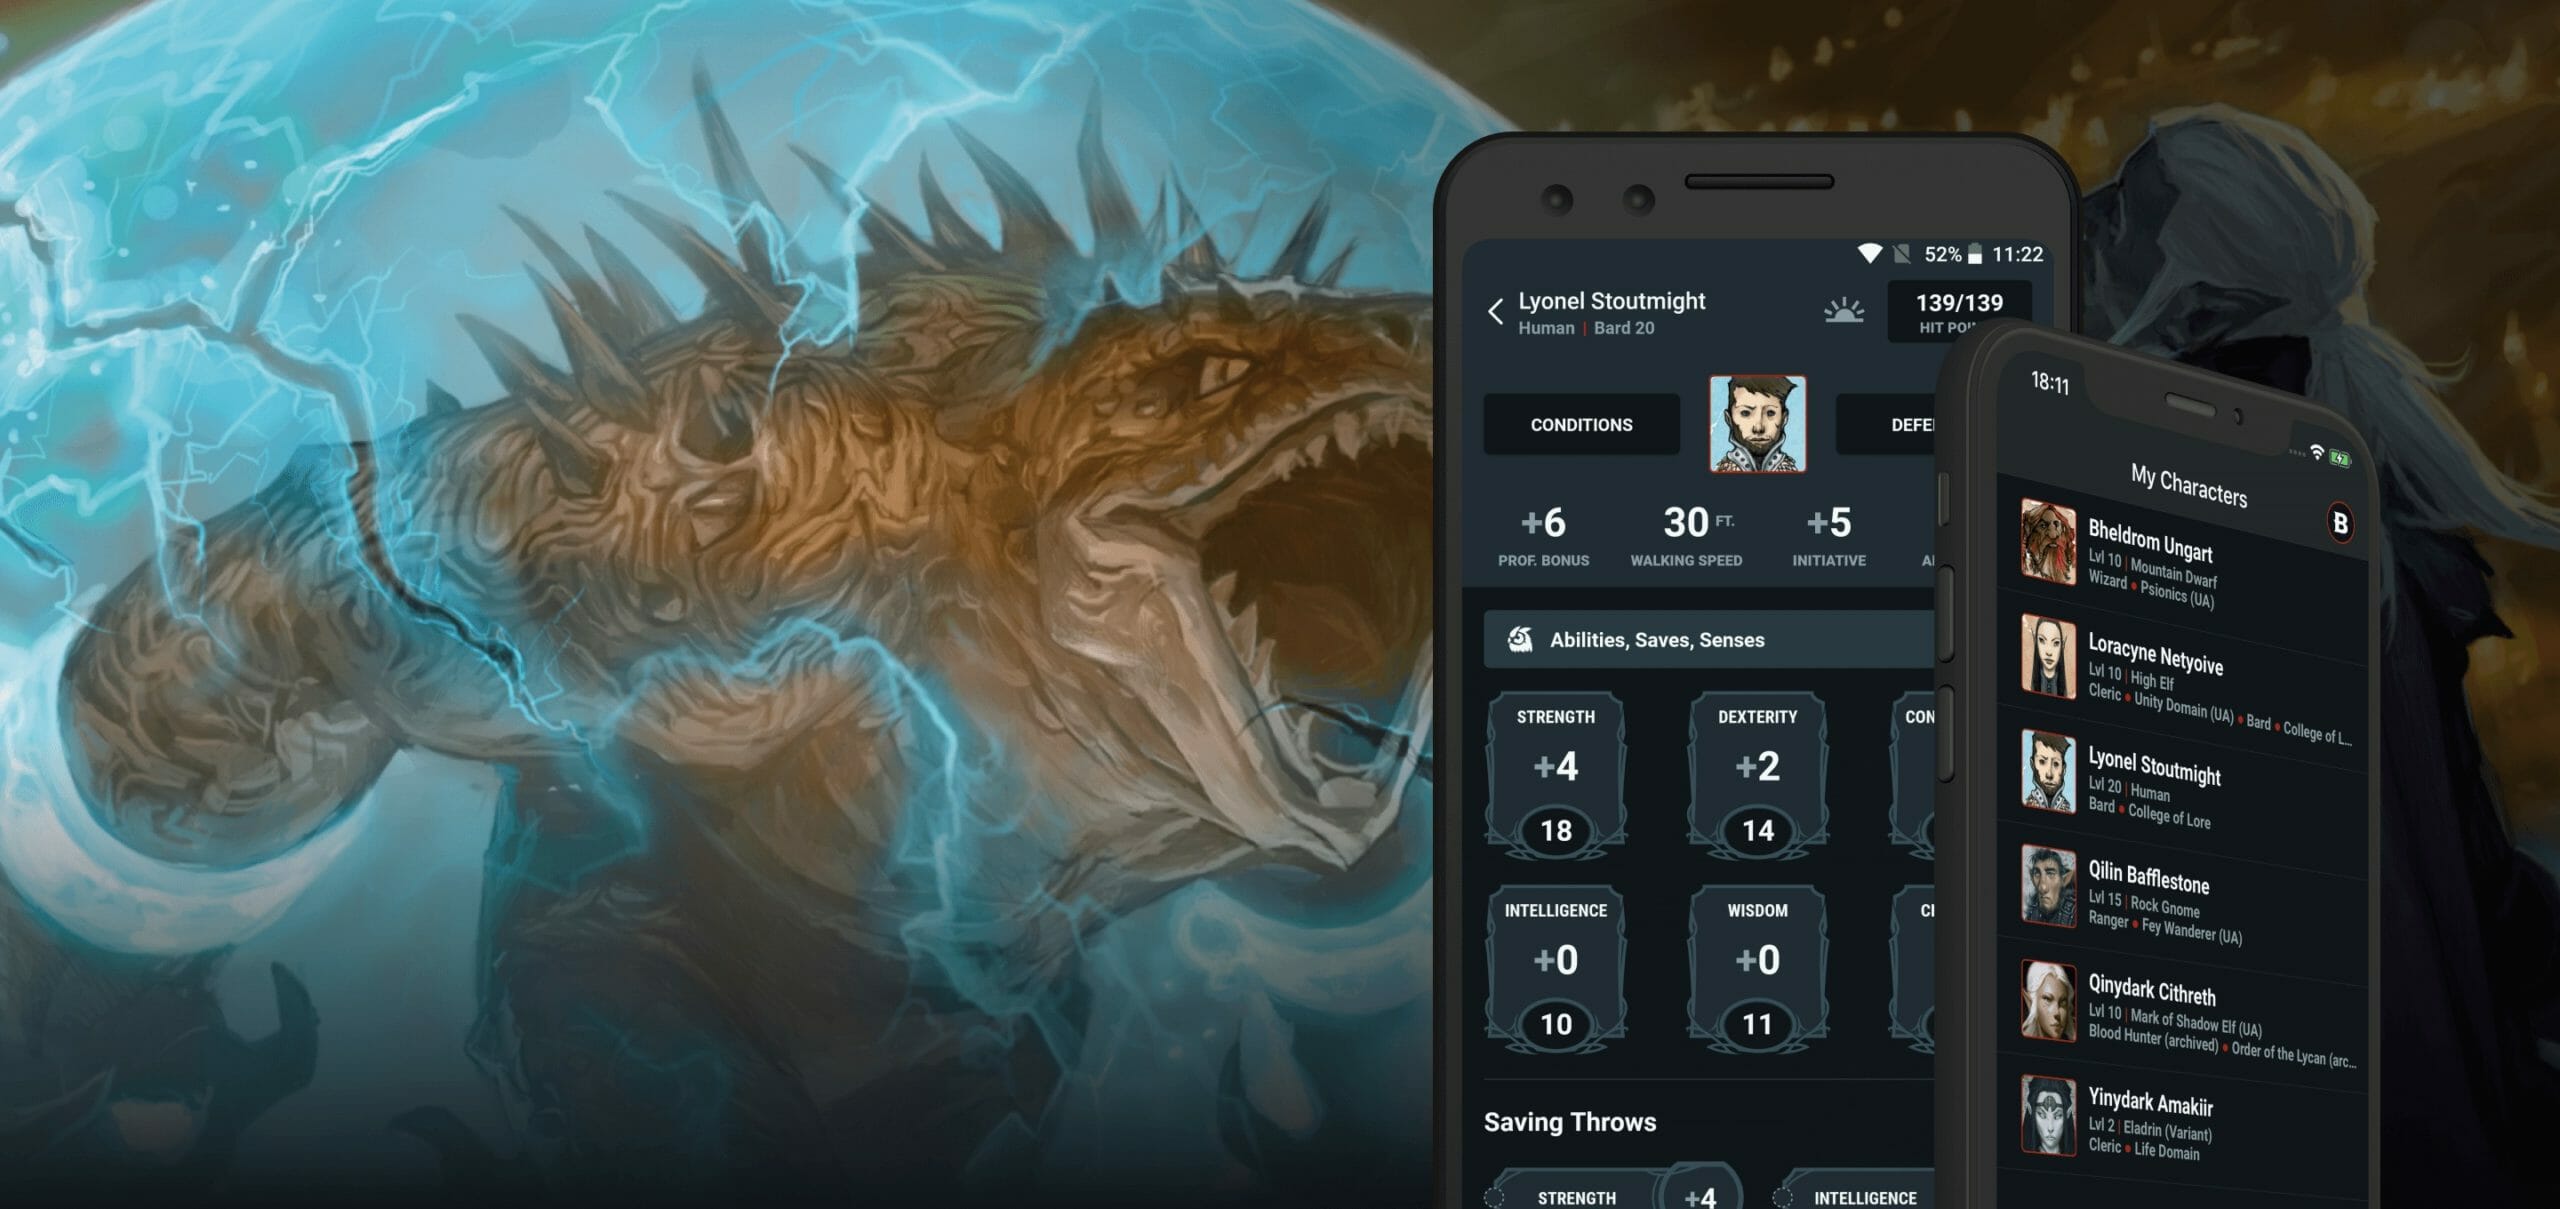 D&D Beyond's free mobile app hits the App Store charts